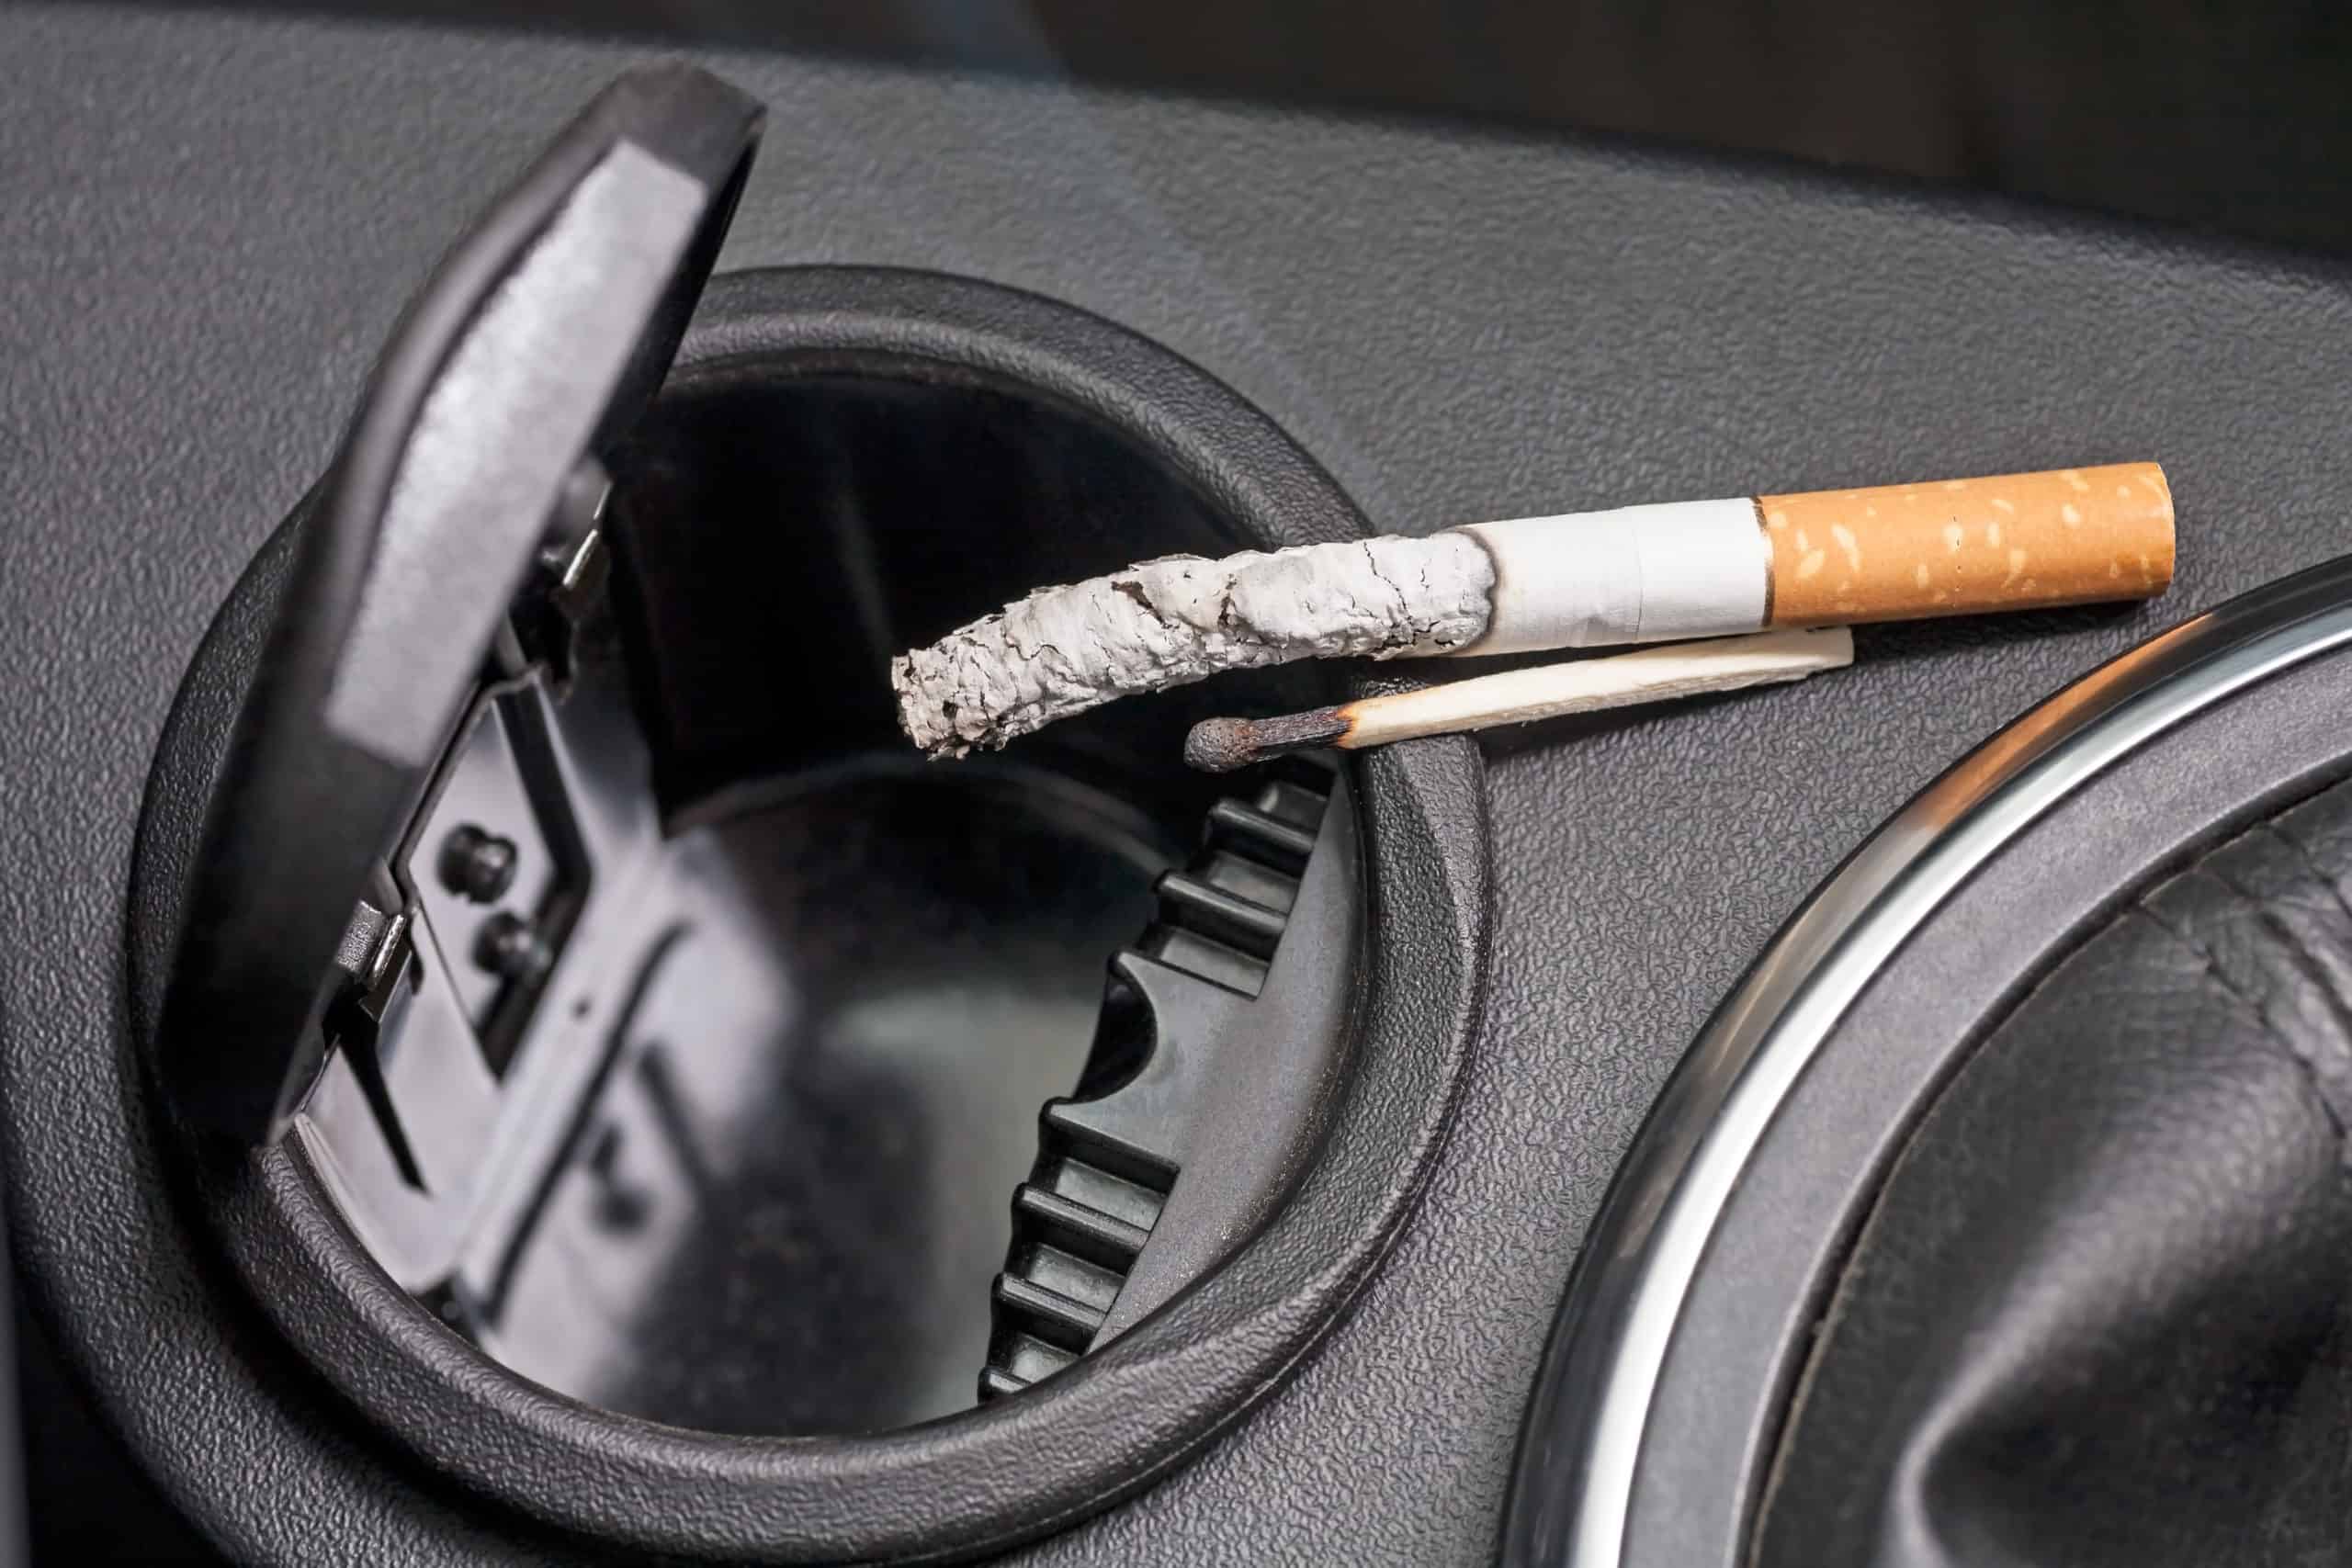 How To Get Cigarette Smell Out Of A Car